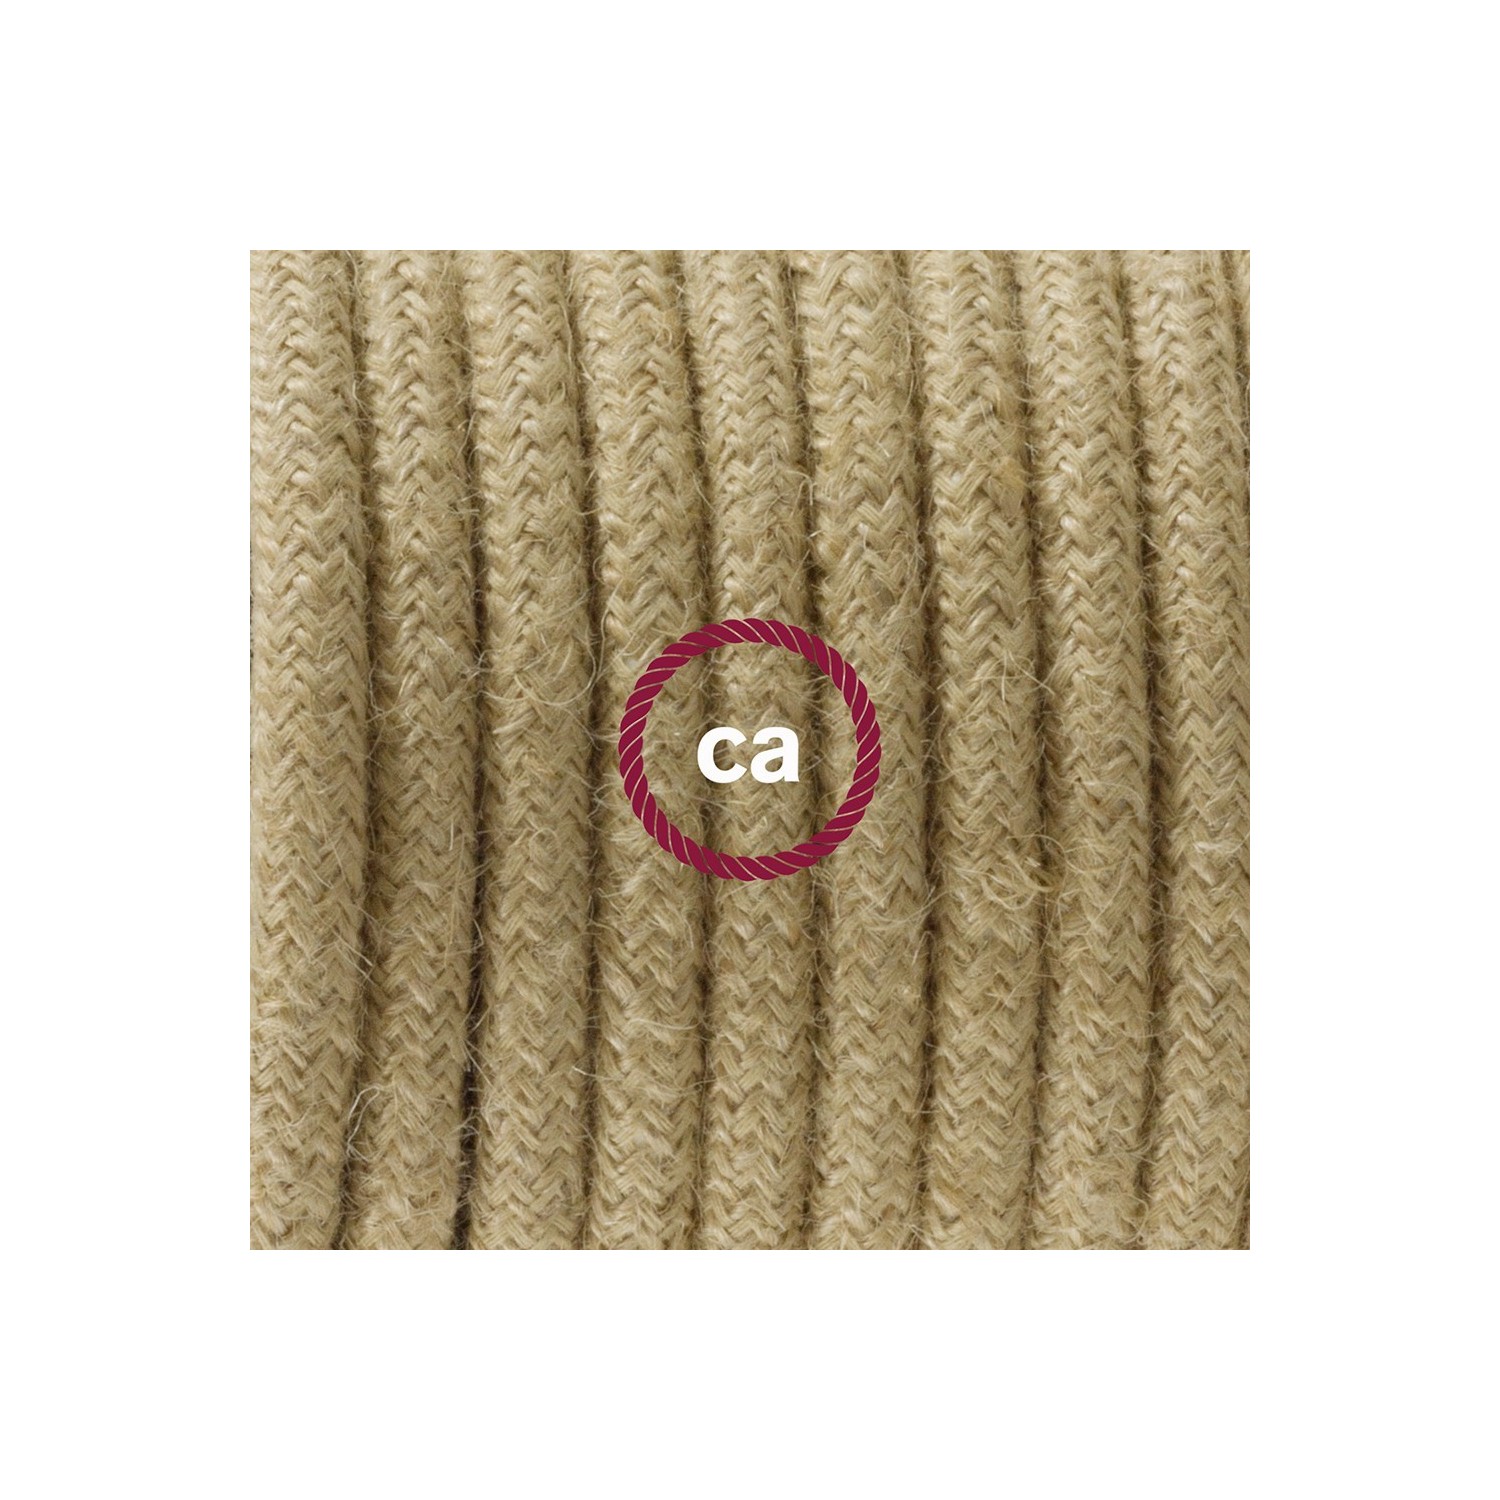 Create your RN06 Jute Snake and bring the light wherever you want.